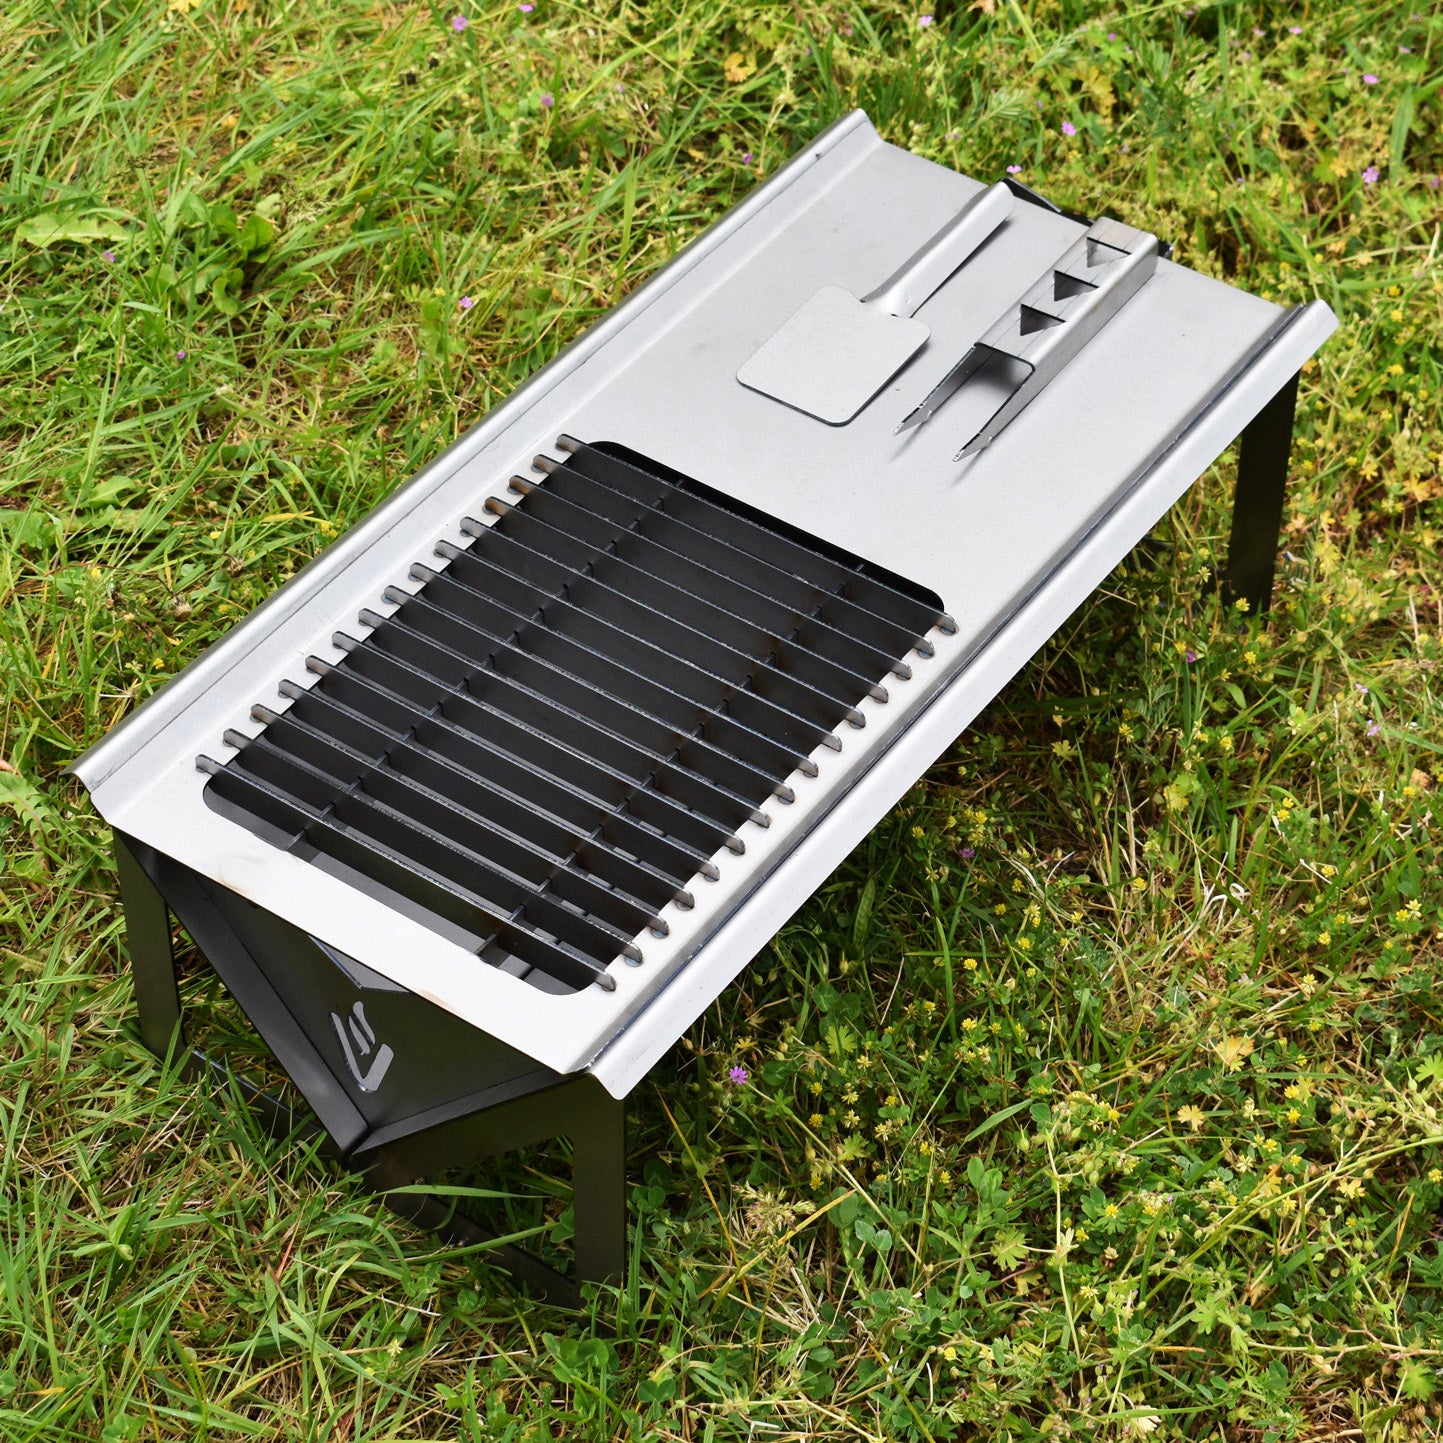 Volcann™ Large Flat-Pack Portable BBQ & Cook Top - Indoor Outdoors